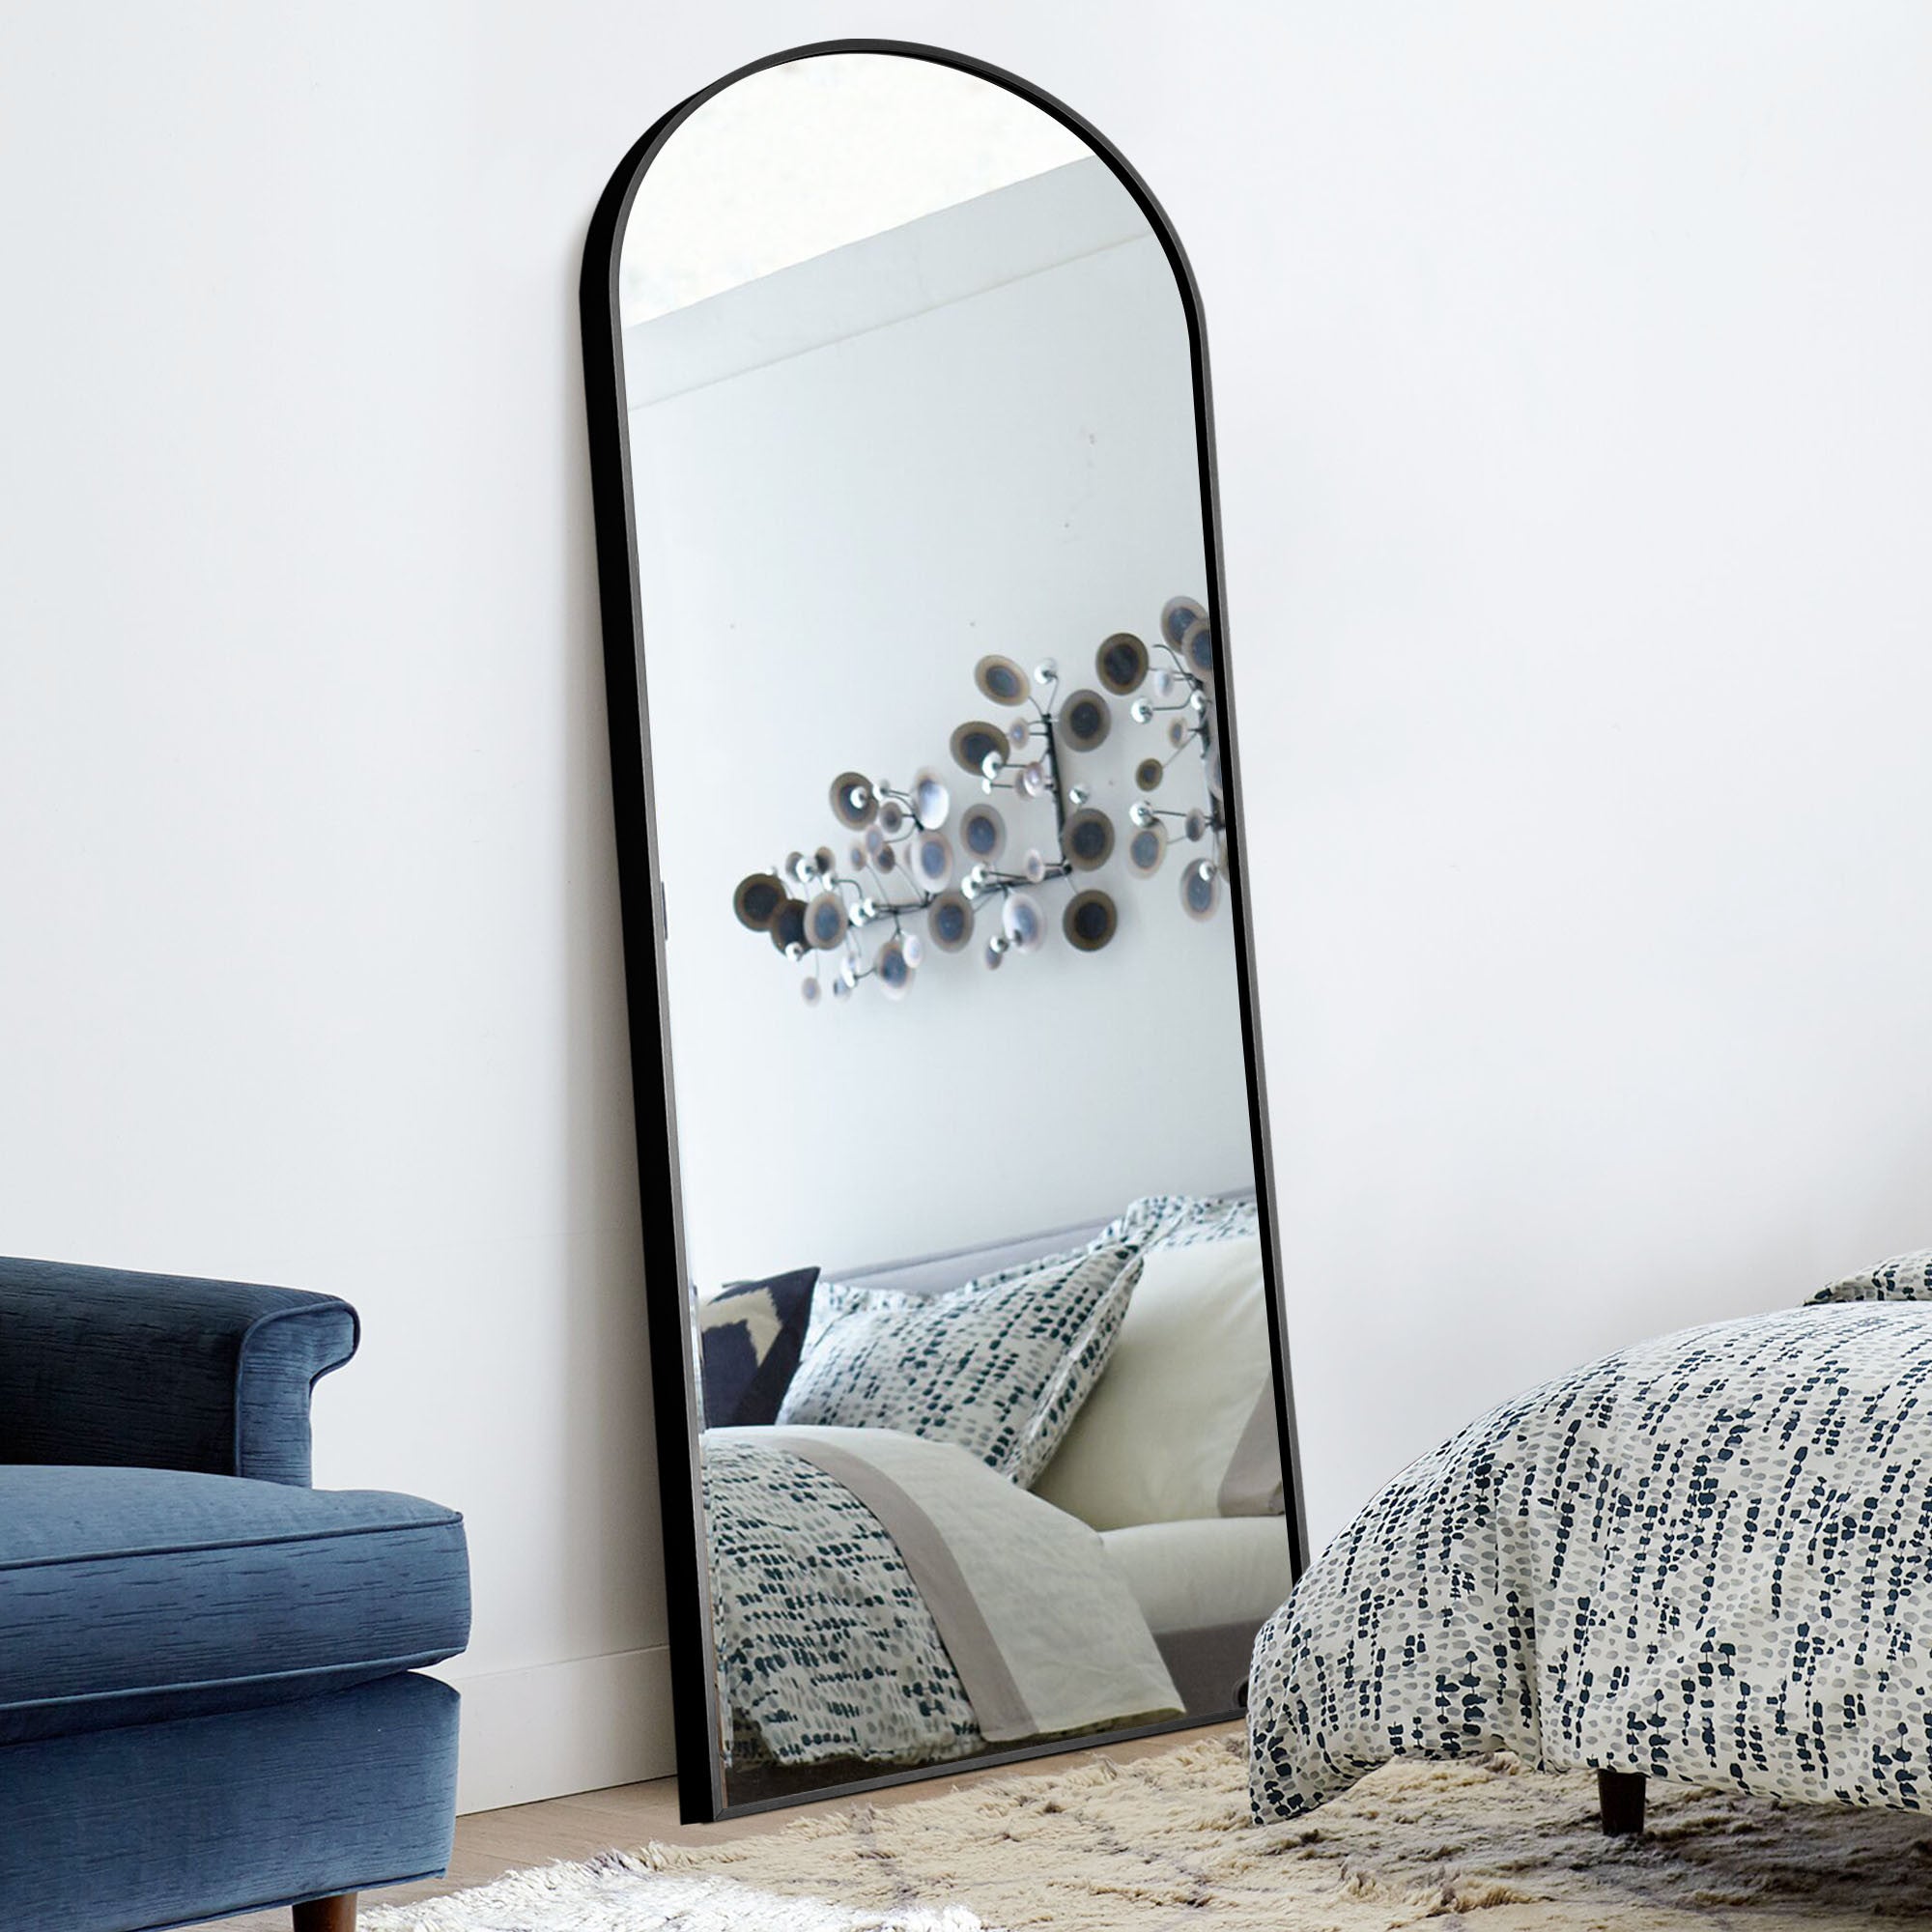 71" Black Arched Metal Narrow Frame Standing Mirror